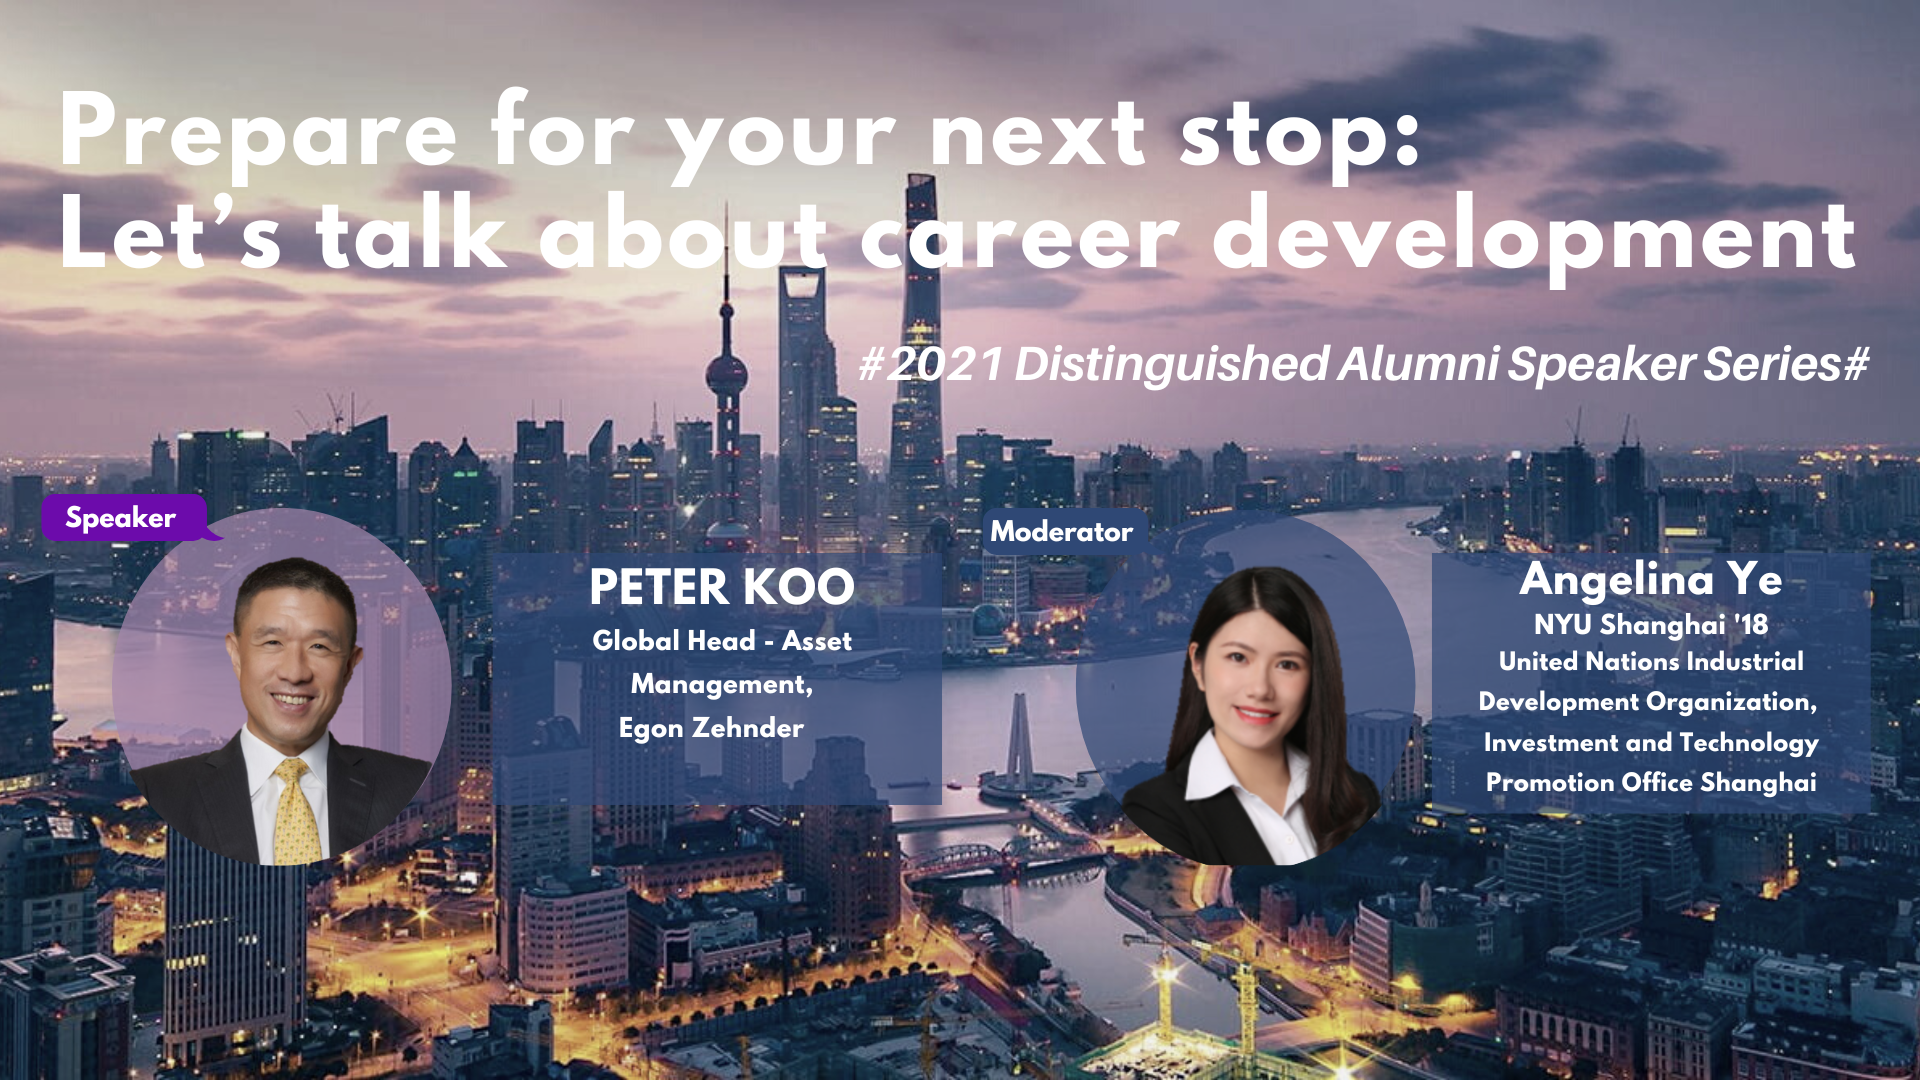 Prepare for your next stop: Let's talk about career development